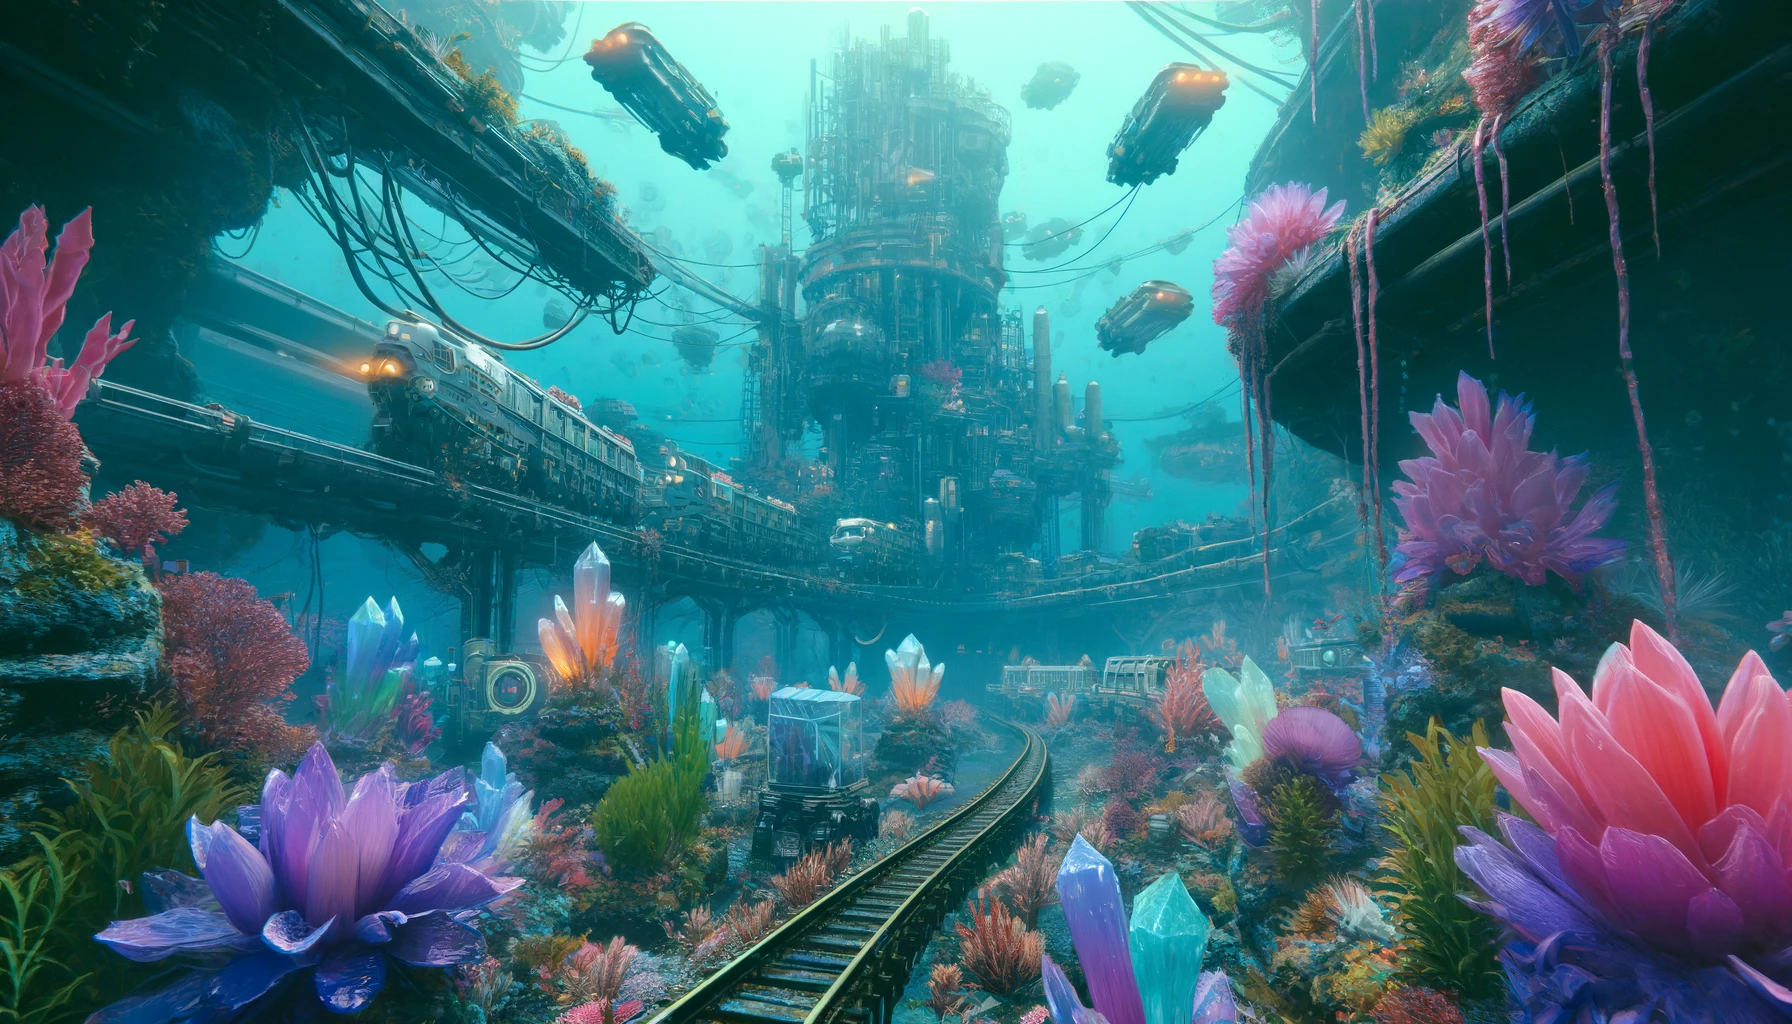 railroad tracks and a train under water with crystals and structures surrounding it